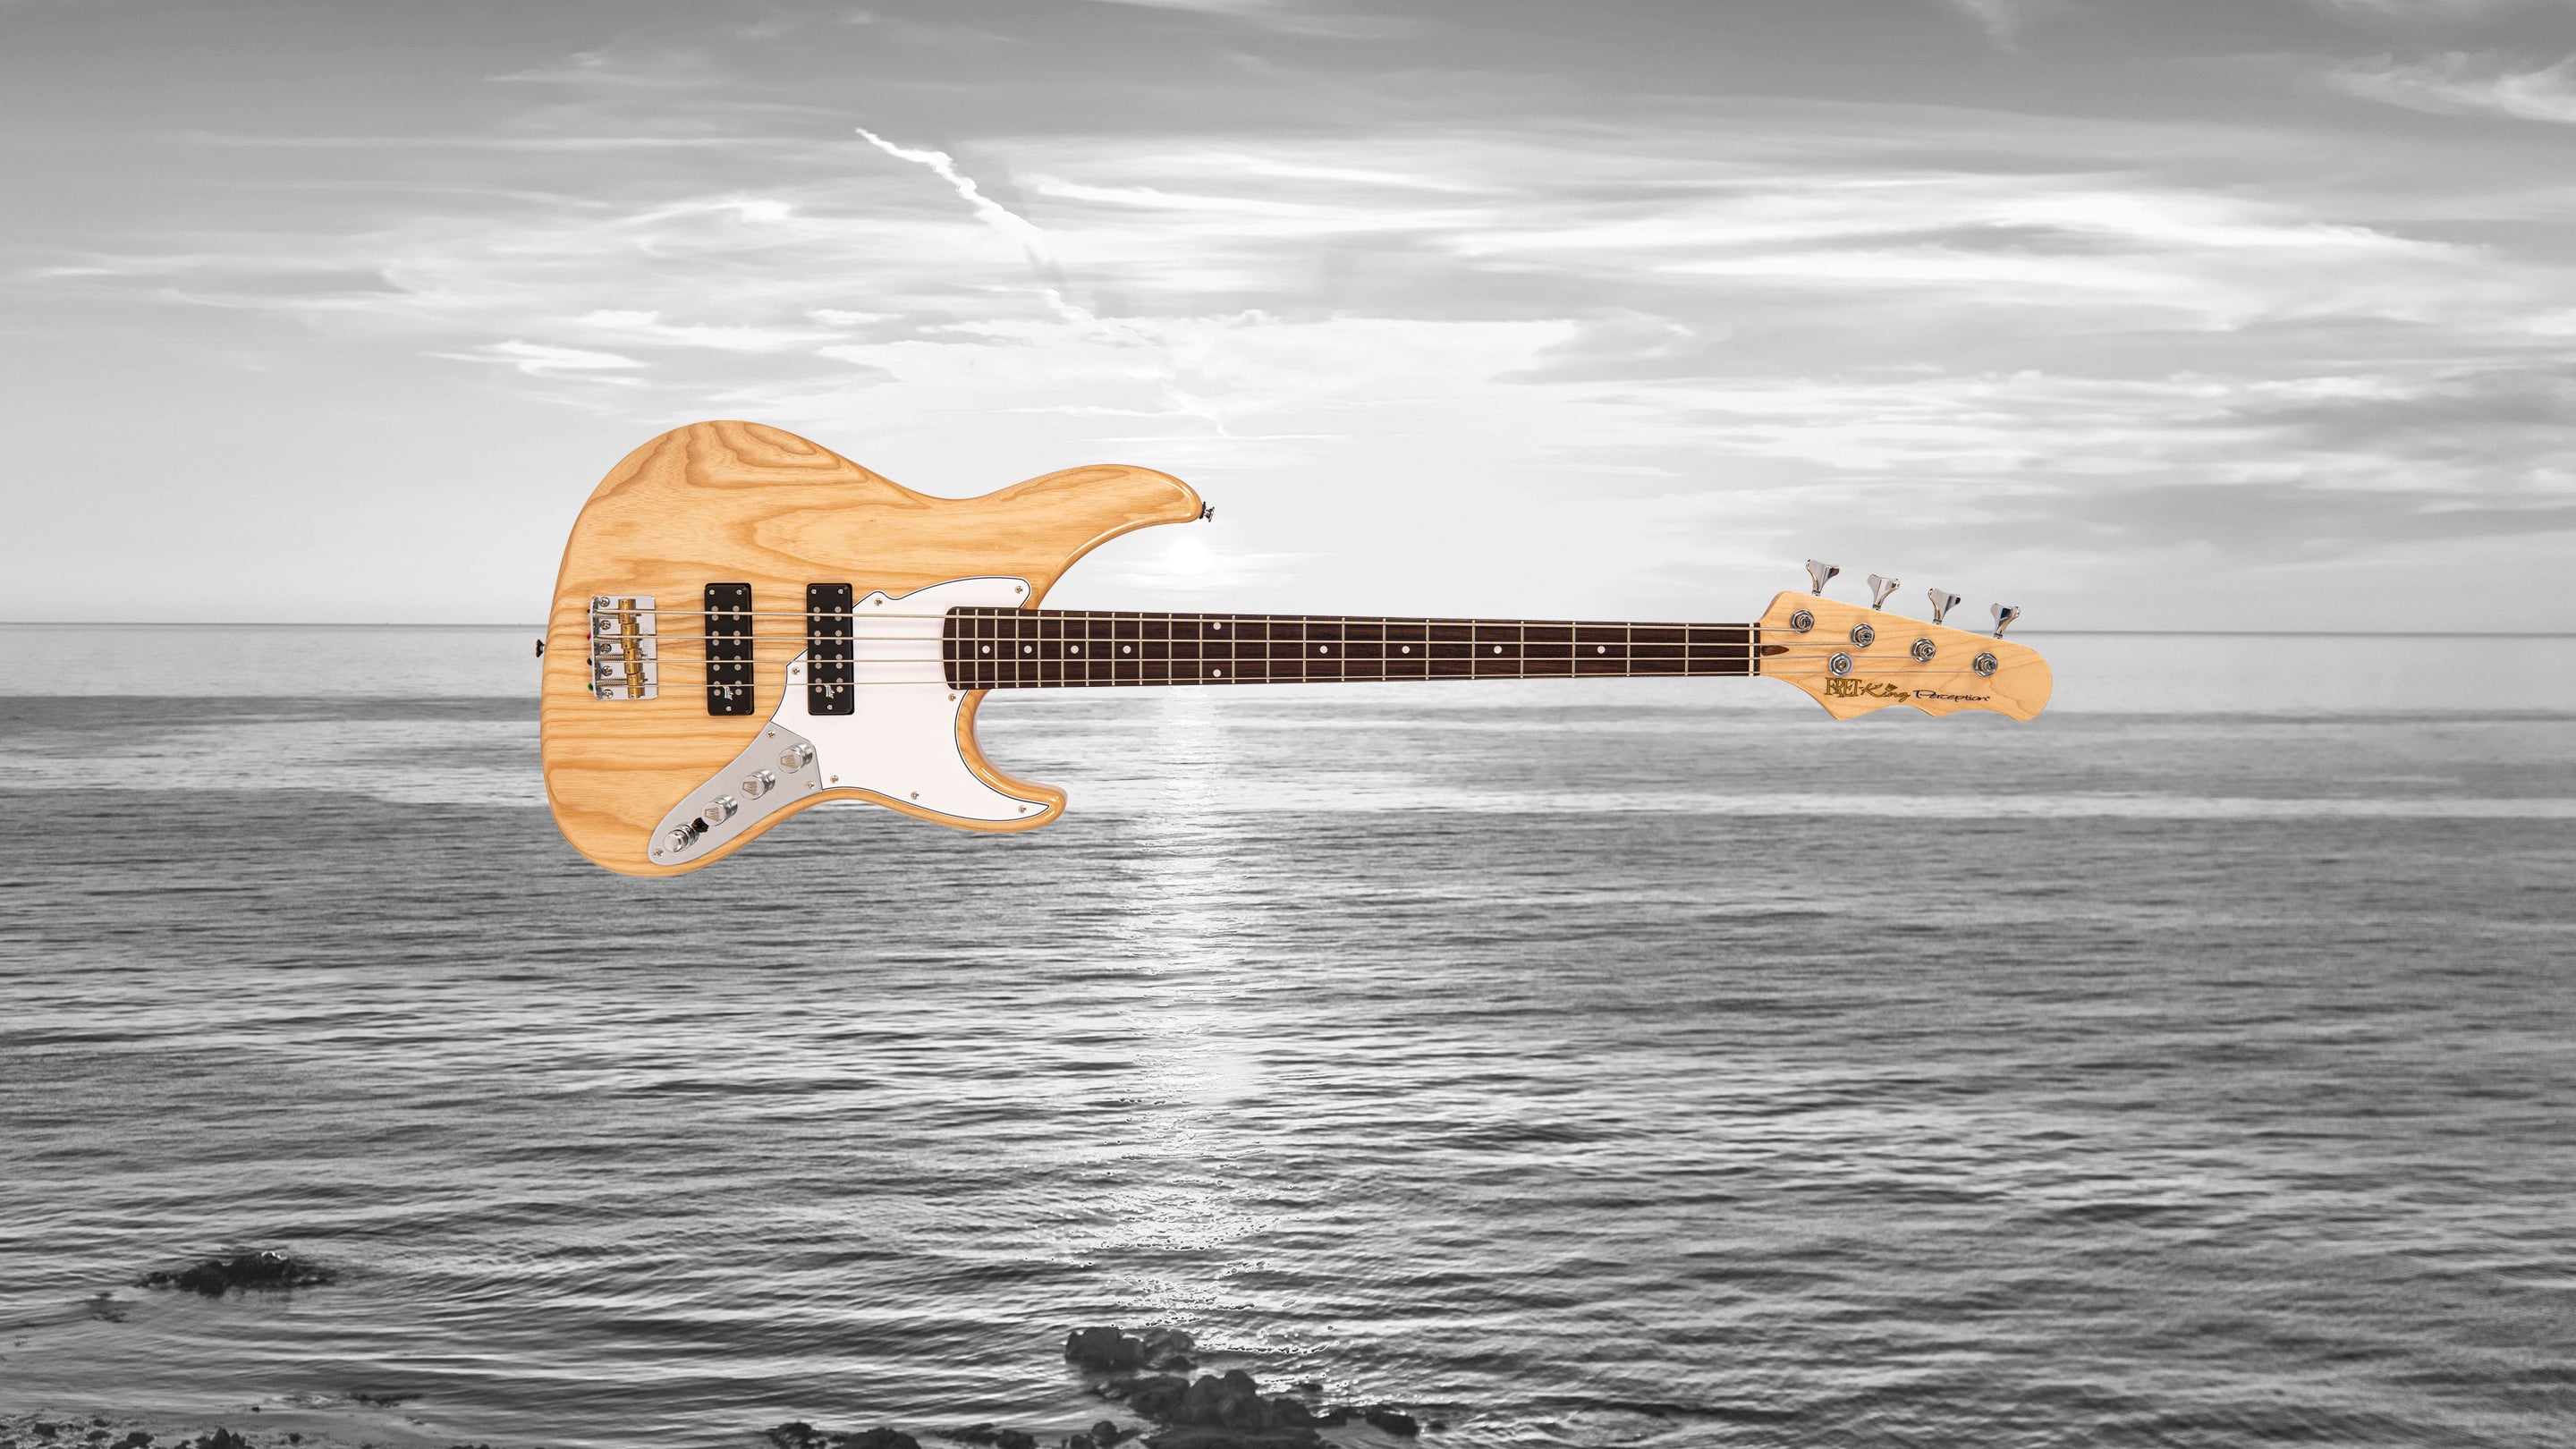 Fret-King guitars, professional working instruments designed in the UK